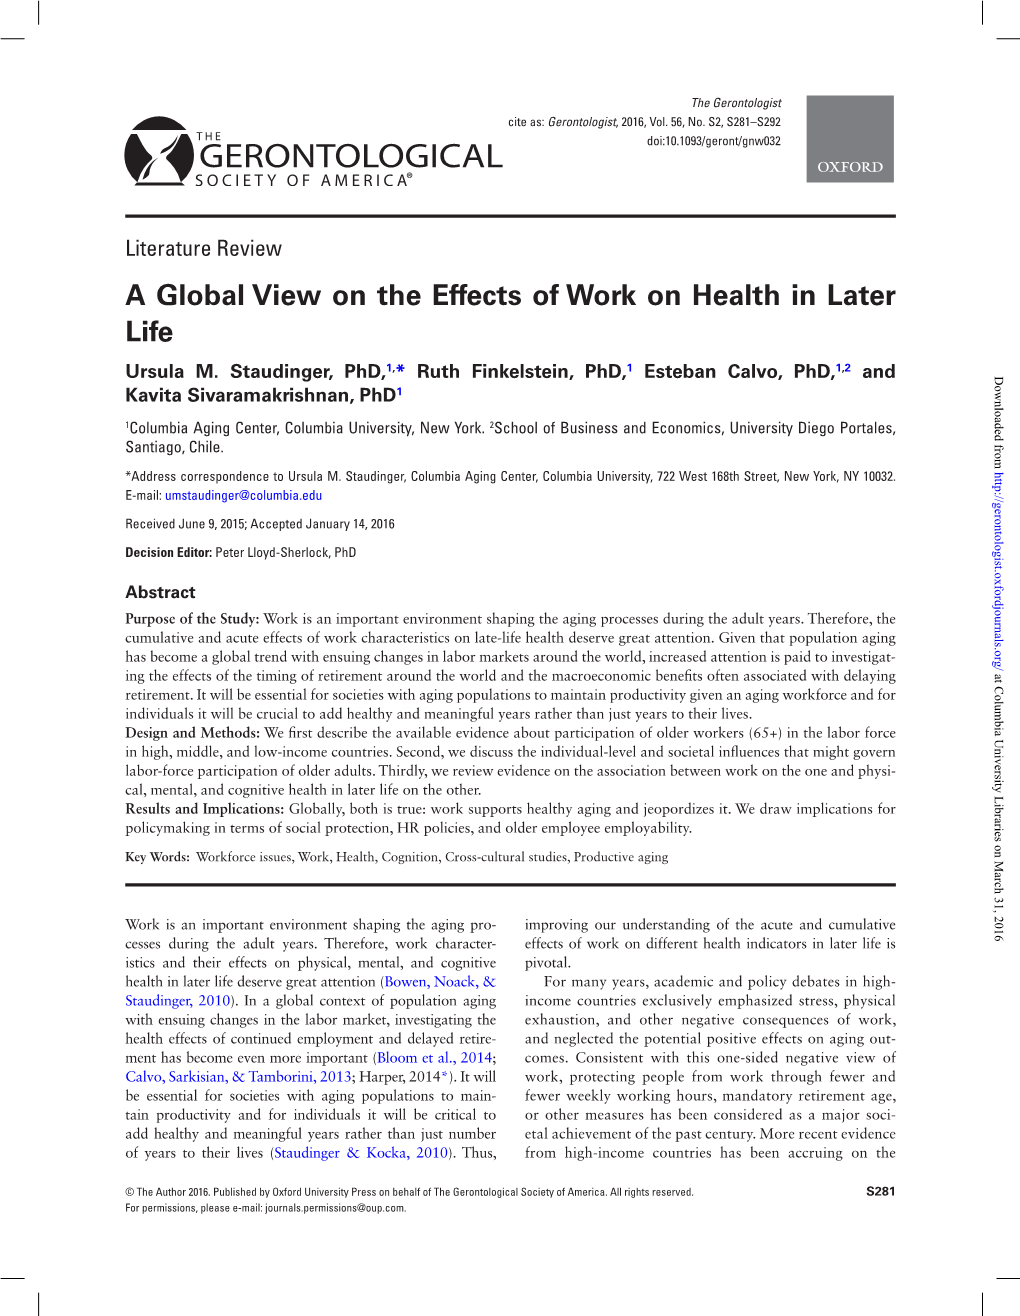 A Global View on the Effects of Work on Health in Later Life